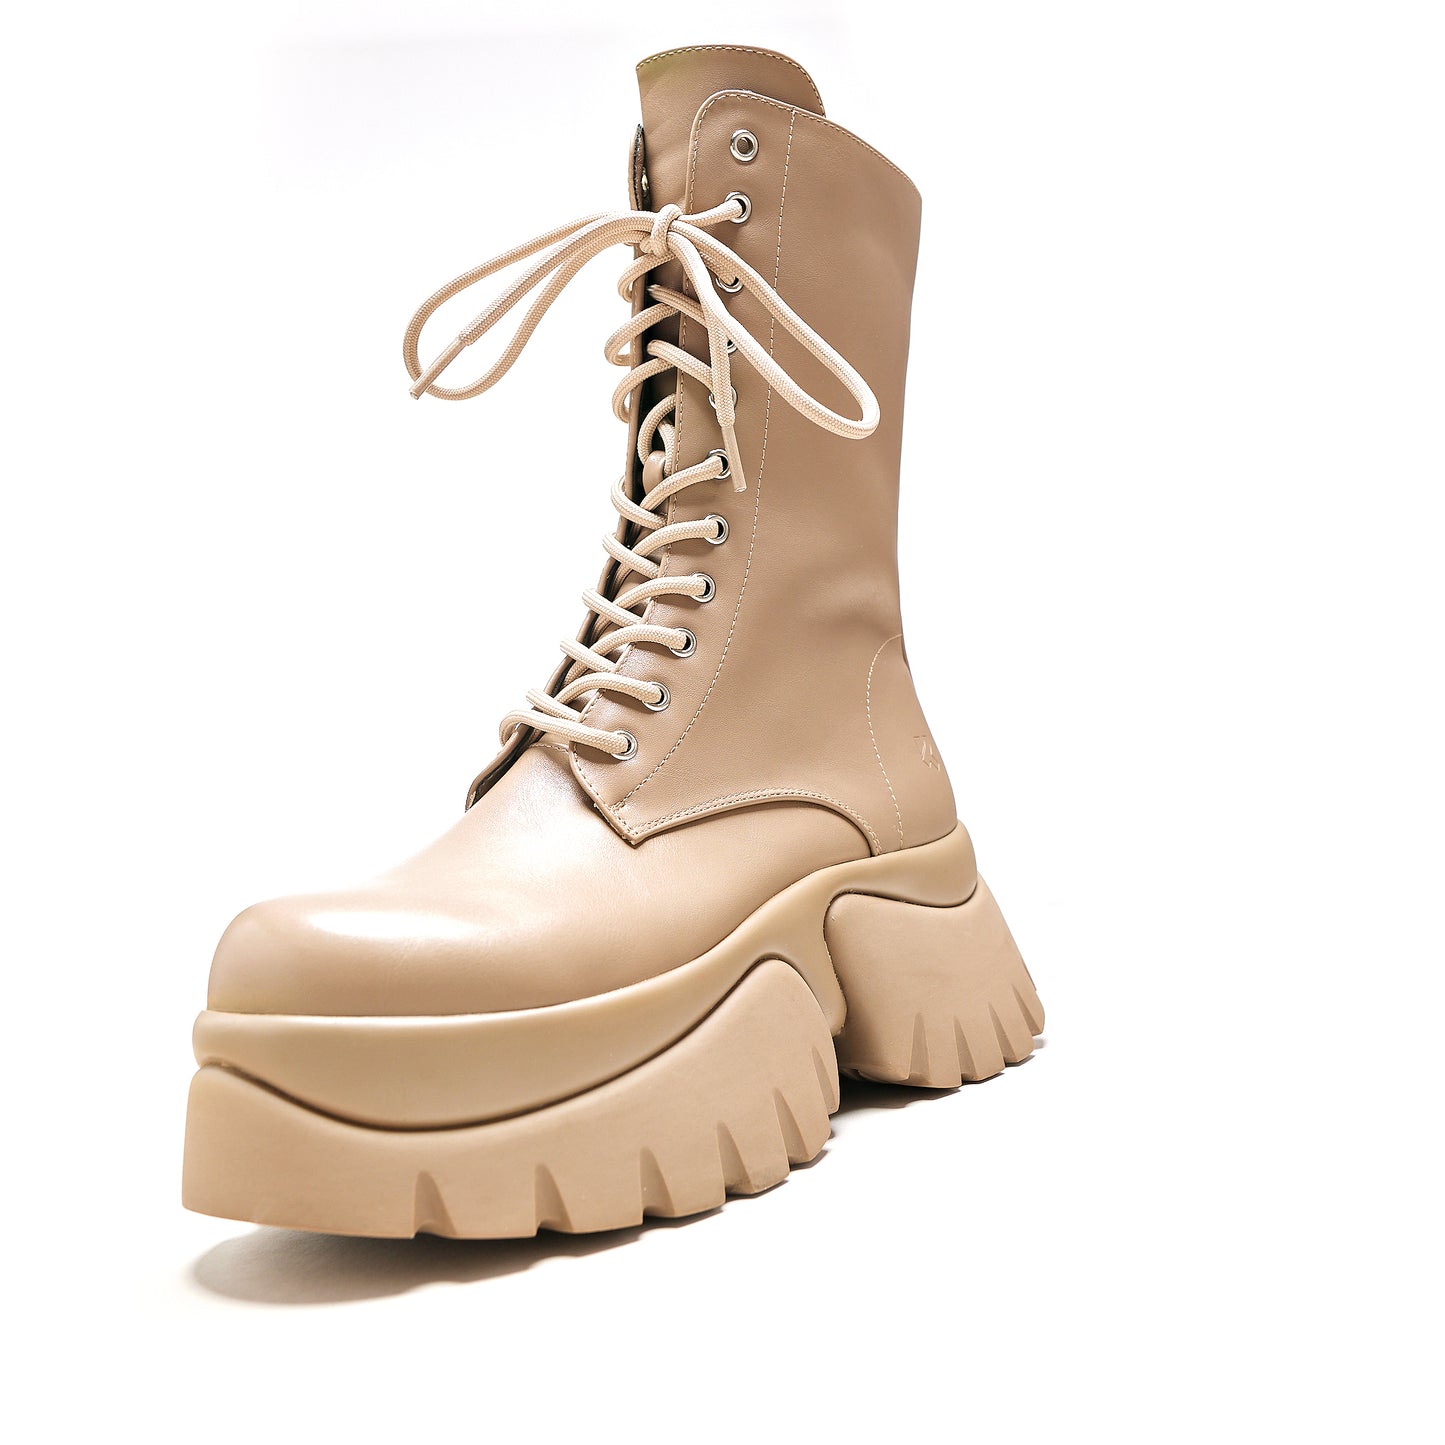 Costal Cruiser Vilun Ankle Boots - Sand - Ankle Boots - KOI Footwear - Beige - Detail View